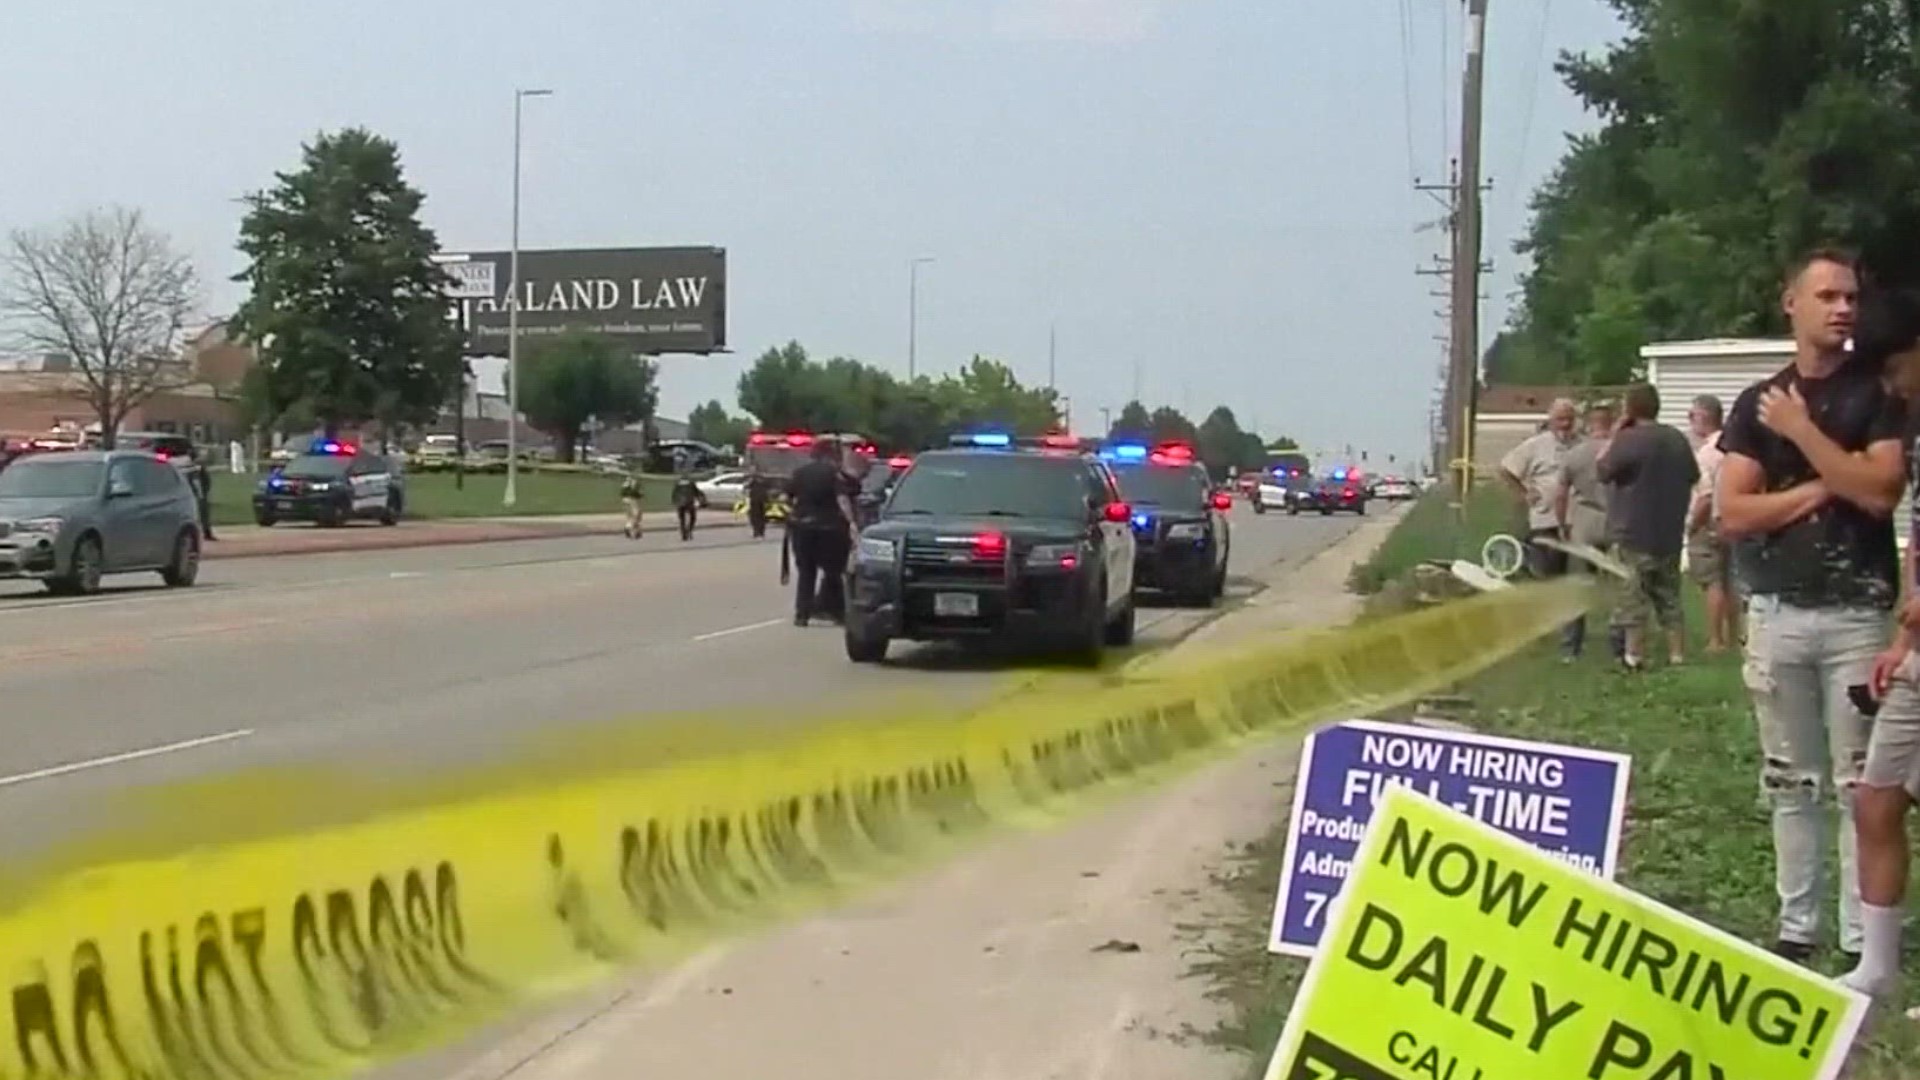 Multiple witnesses say a man opened fire on police officers before other officers shot him.